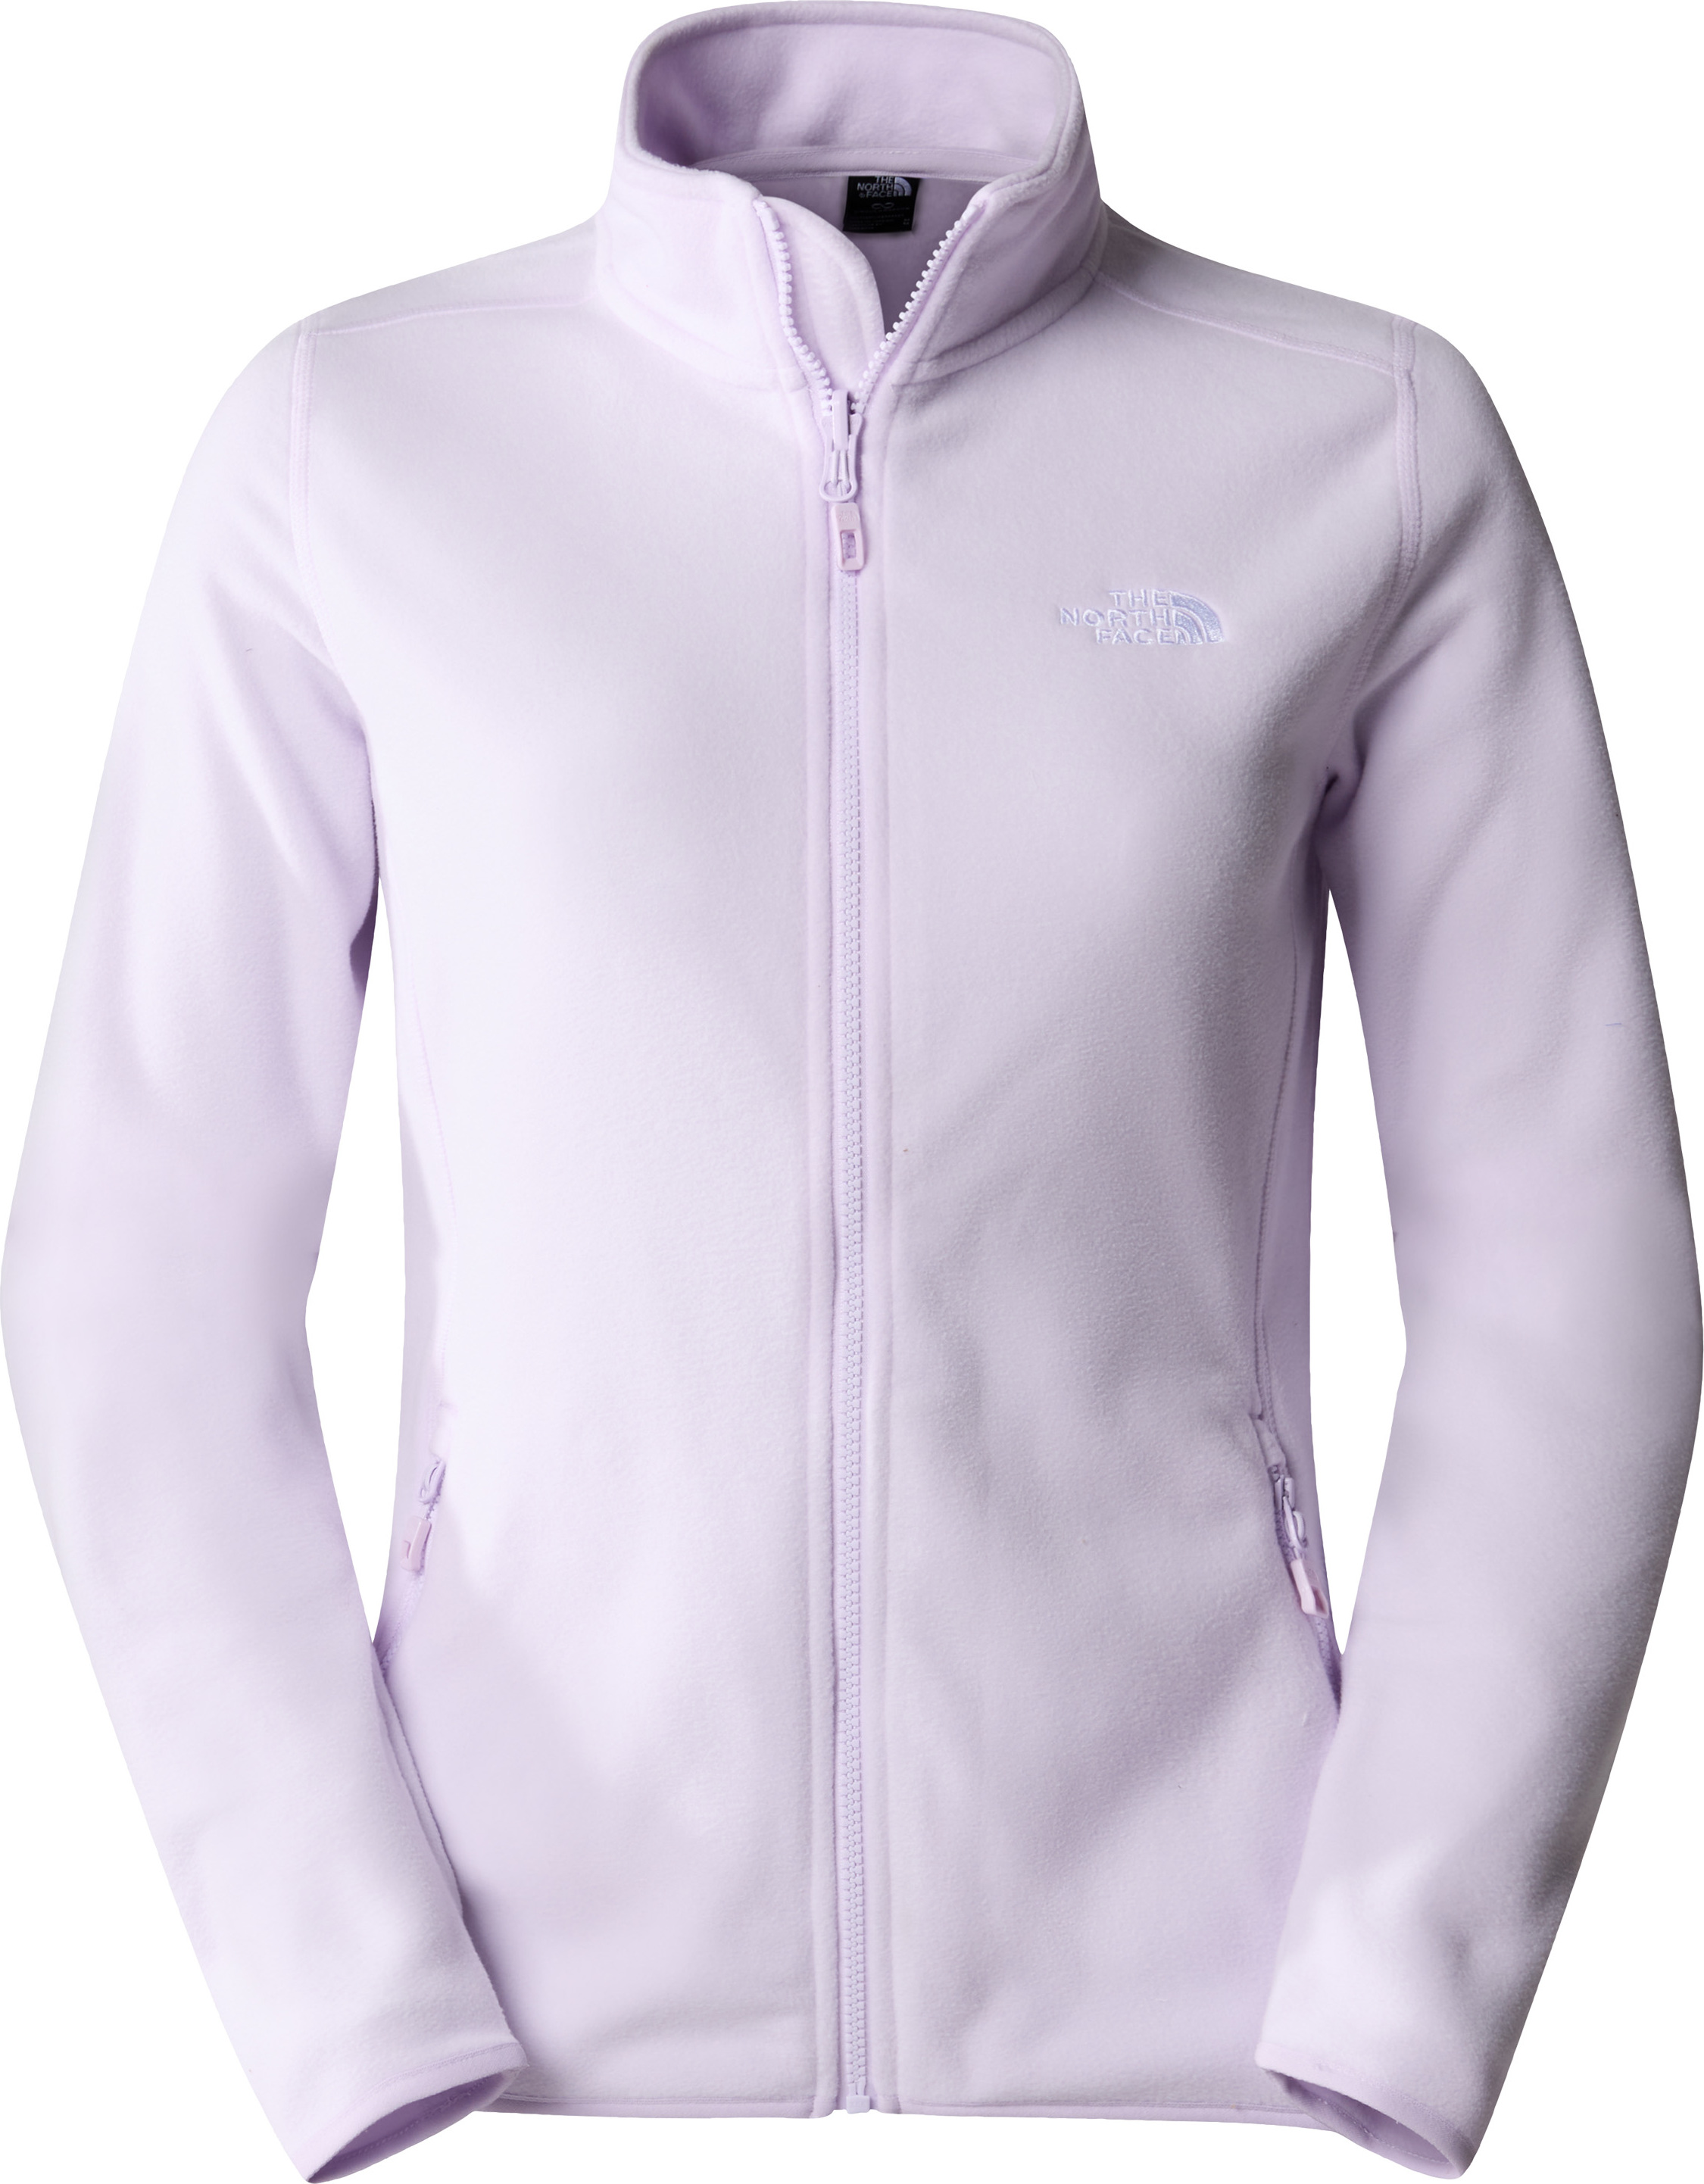 The North Face Women's 100 Glacier Full-Zip Fleece Icy Lilac L, Icy Lilac